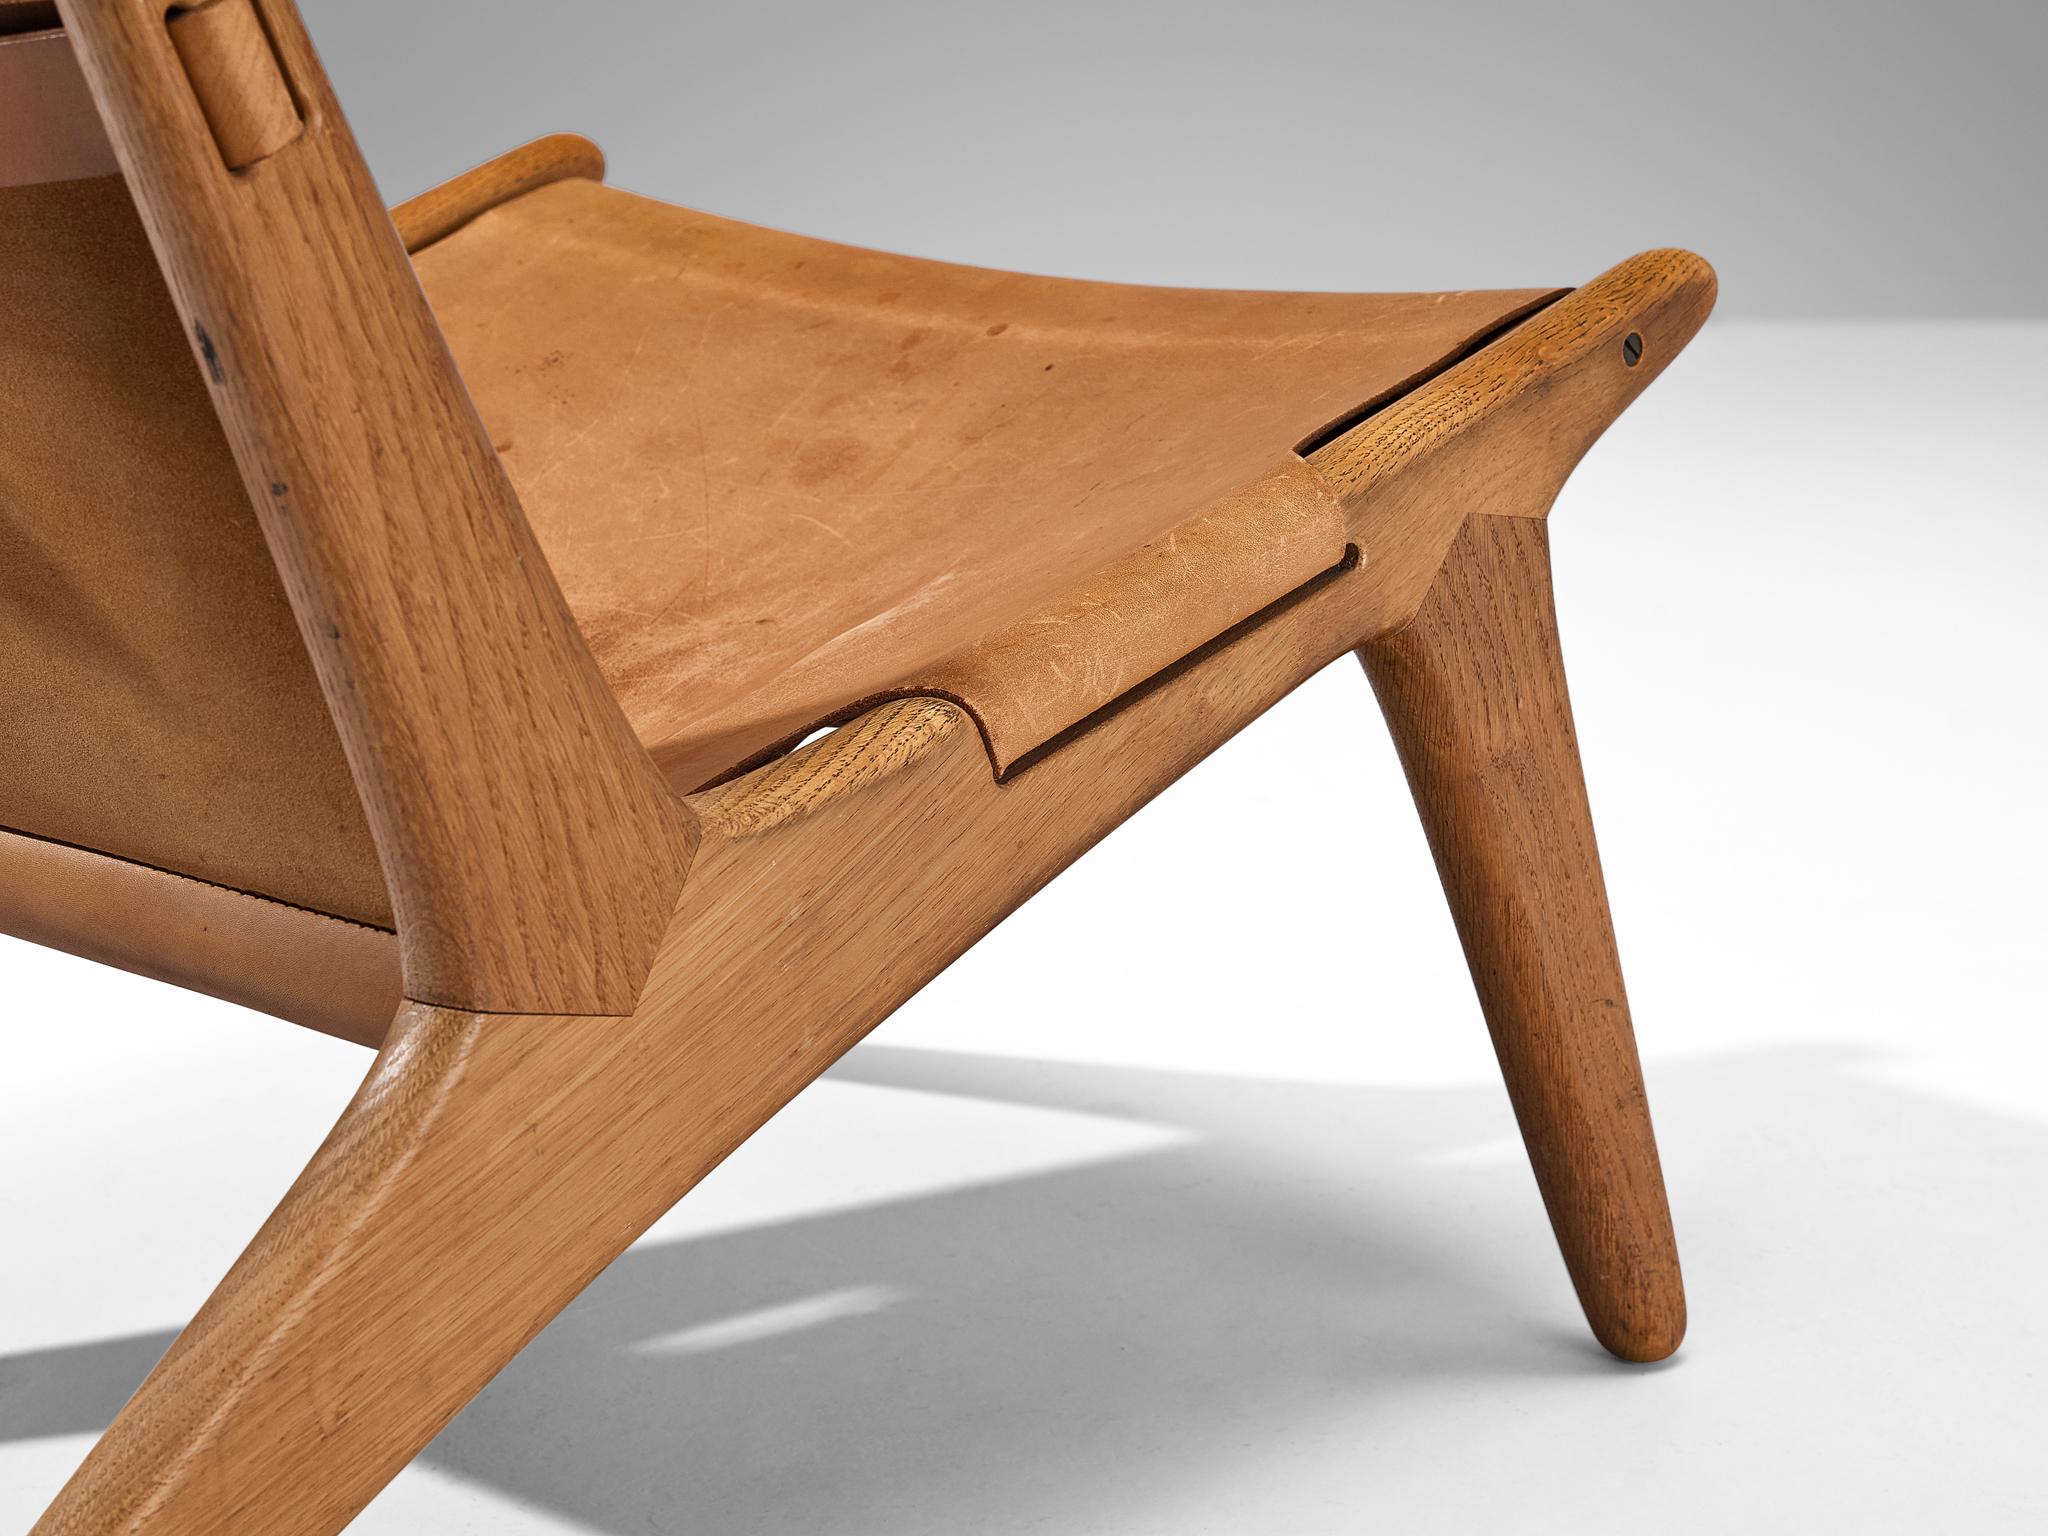 Uno & Östen Kristiansson for Luxus Pair of Hunting Chairs in Leather and Oak